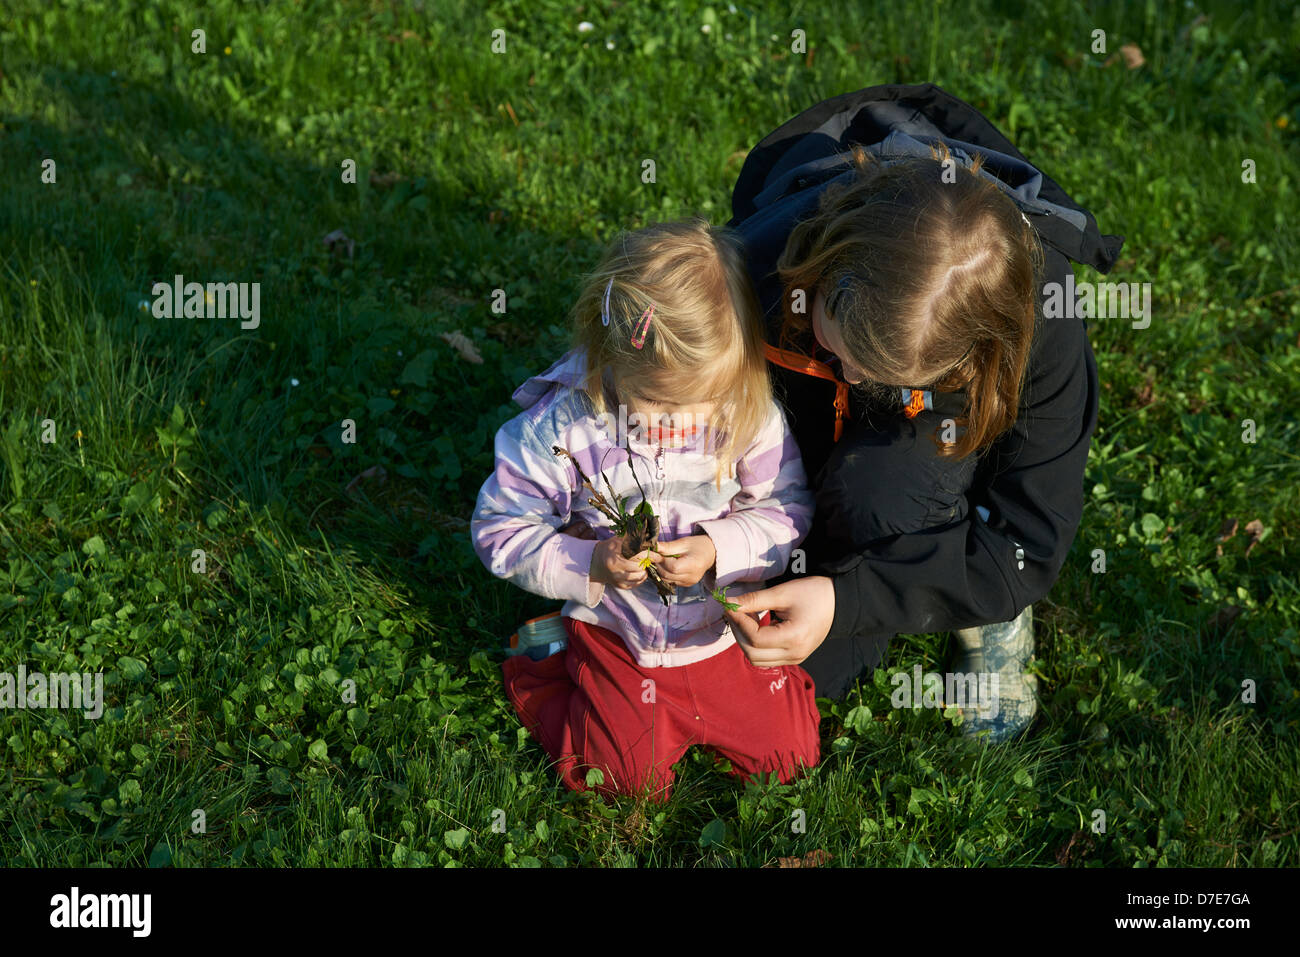 Two children blond girls playing with grass garden and flowers summer time Stock Photo